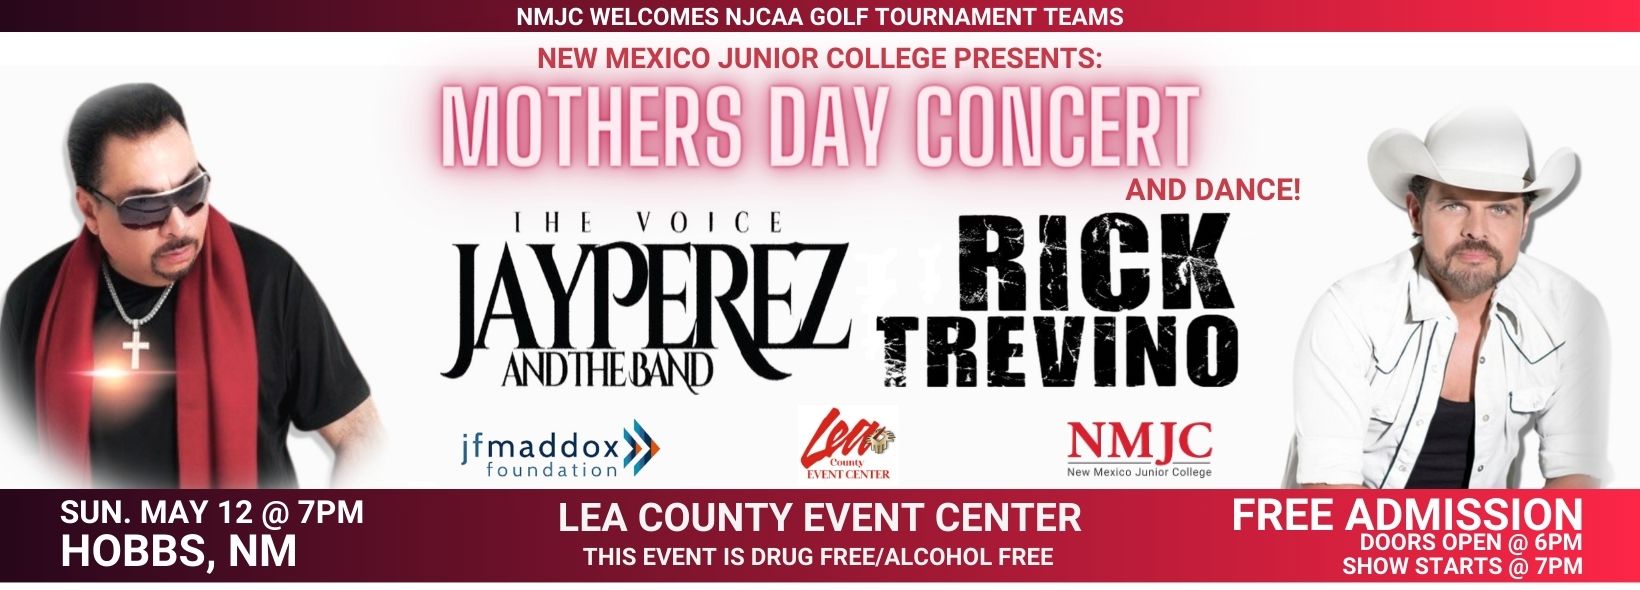 May 12 - NMJC ENMT Mother's Day Concert - Featuring Rick Trevino and Jay Perez and The Band